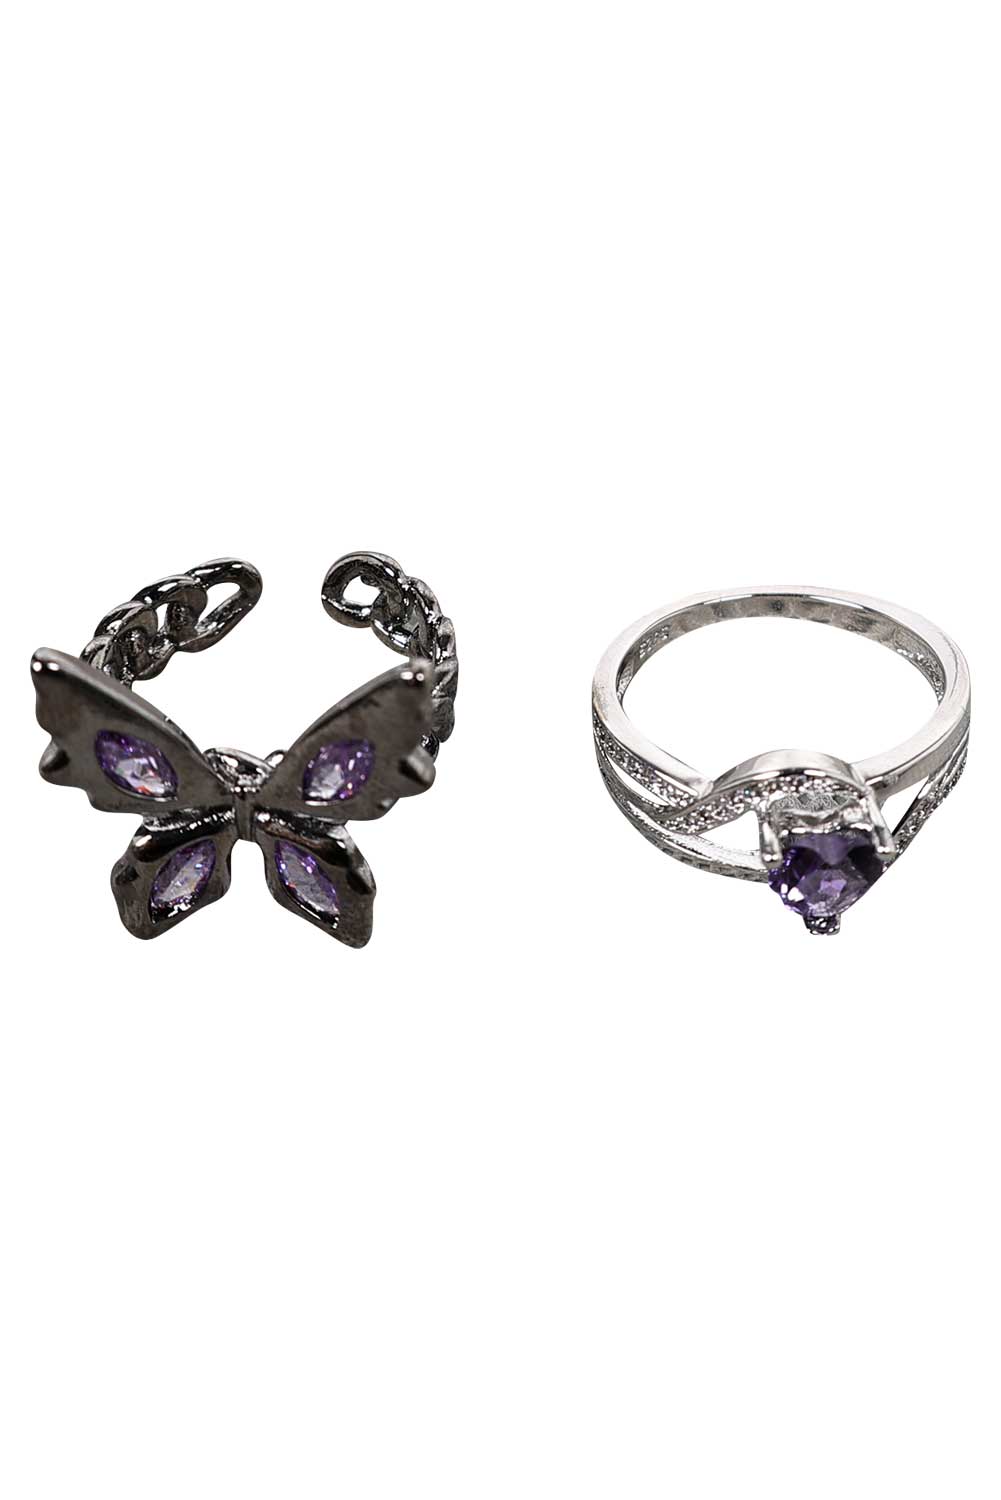 Game Valorant Clove Cosplay Love Ring Butterfly Rings Set Halloween Costume Accessories